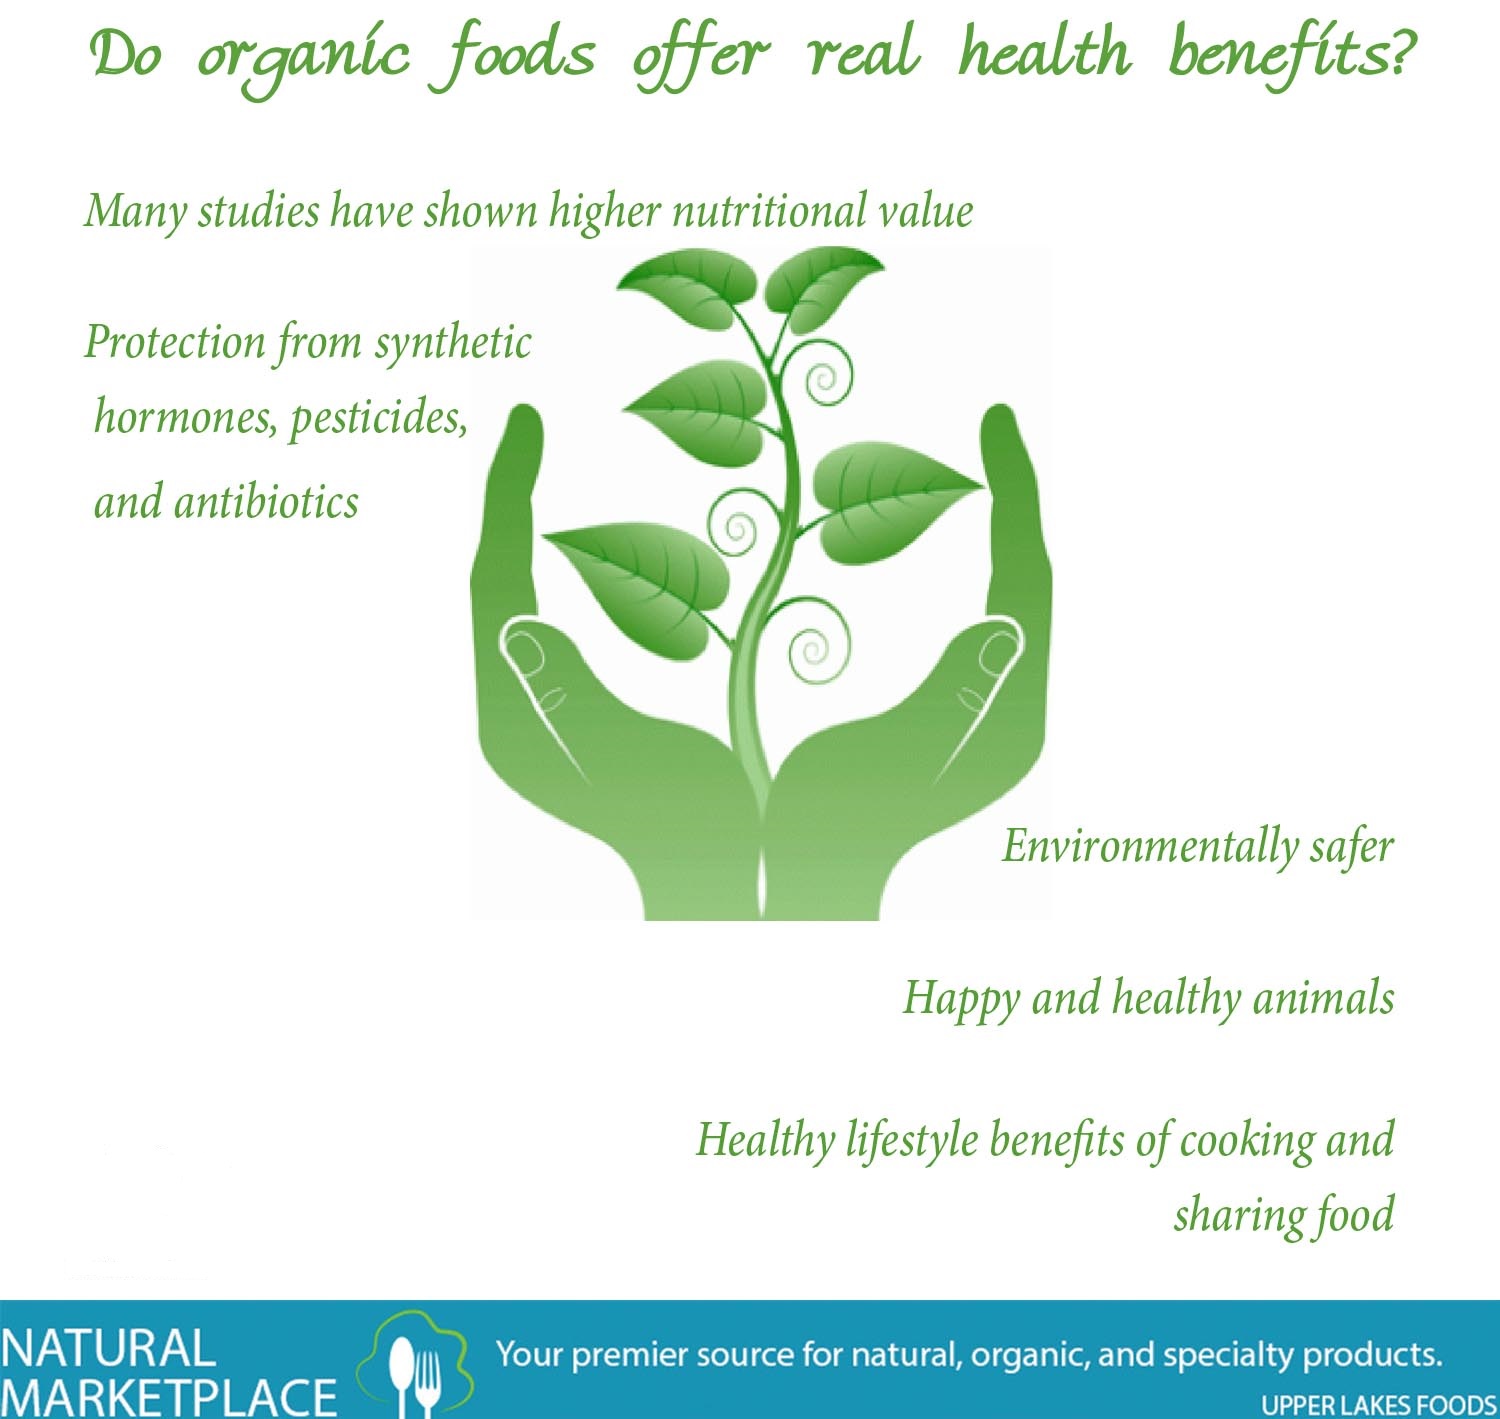 Nutritional benefits of organic foods